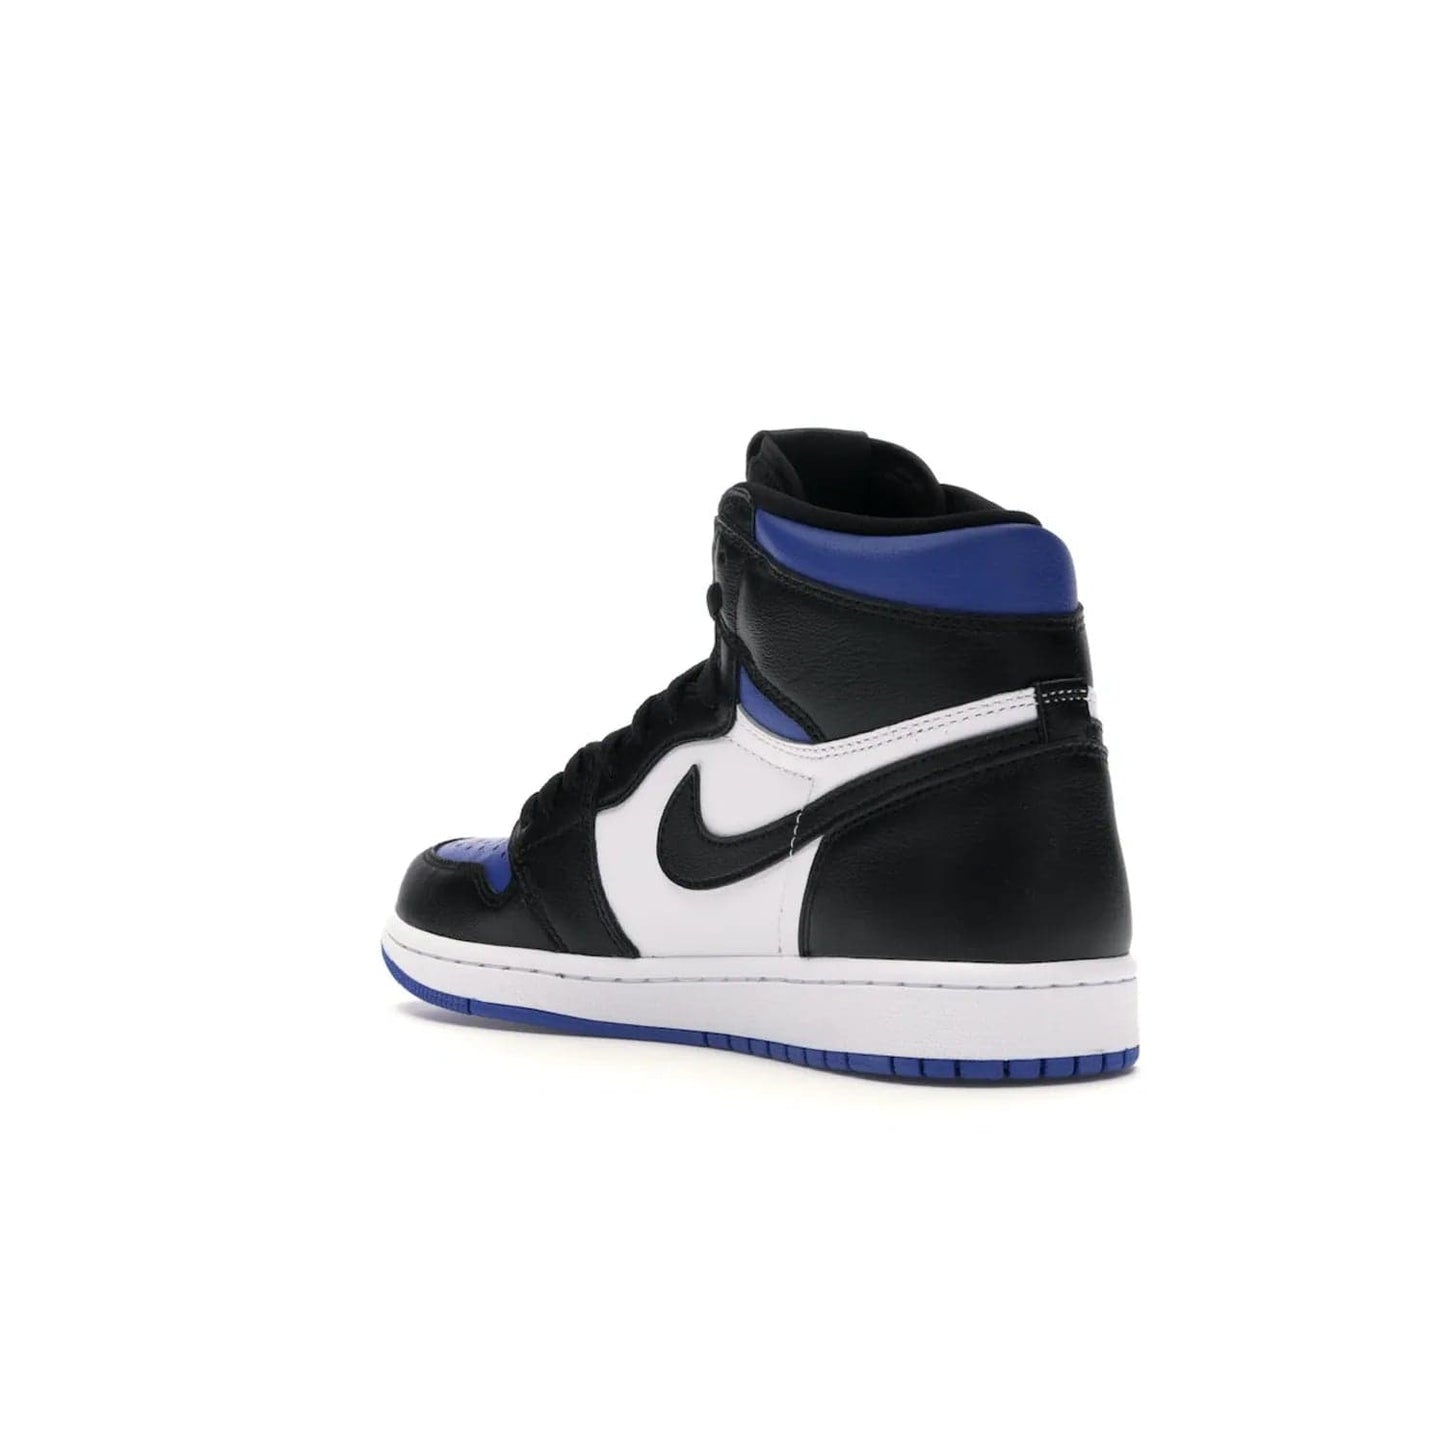 Jordan 1 Retro High Royal Toe - Image 24 - Only at www.BallersClubKickz.com - Refresh your look with the Jordan 1 Retro High Royal Toe. This classic AJ 1 sports a white and royal leather upper, black leather overlays, and branded leather tongue tag. Pick up today and set the streets ablaze.